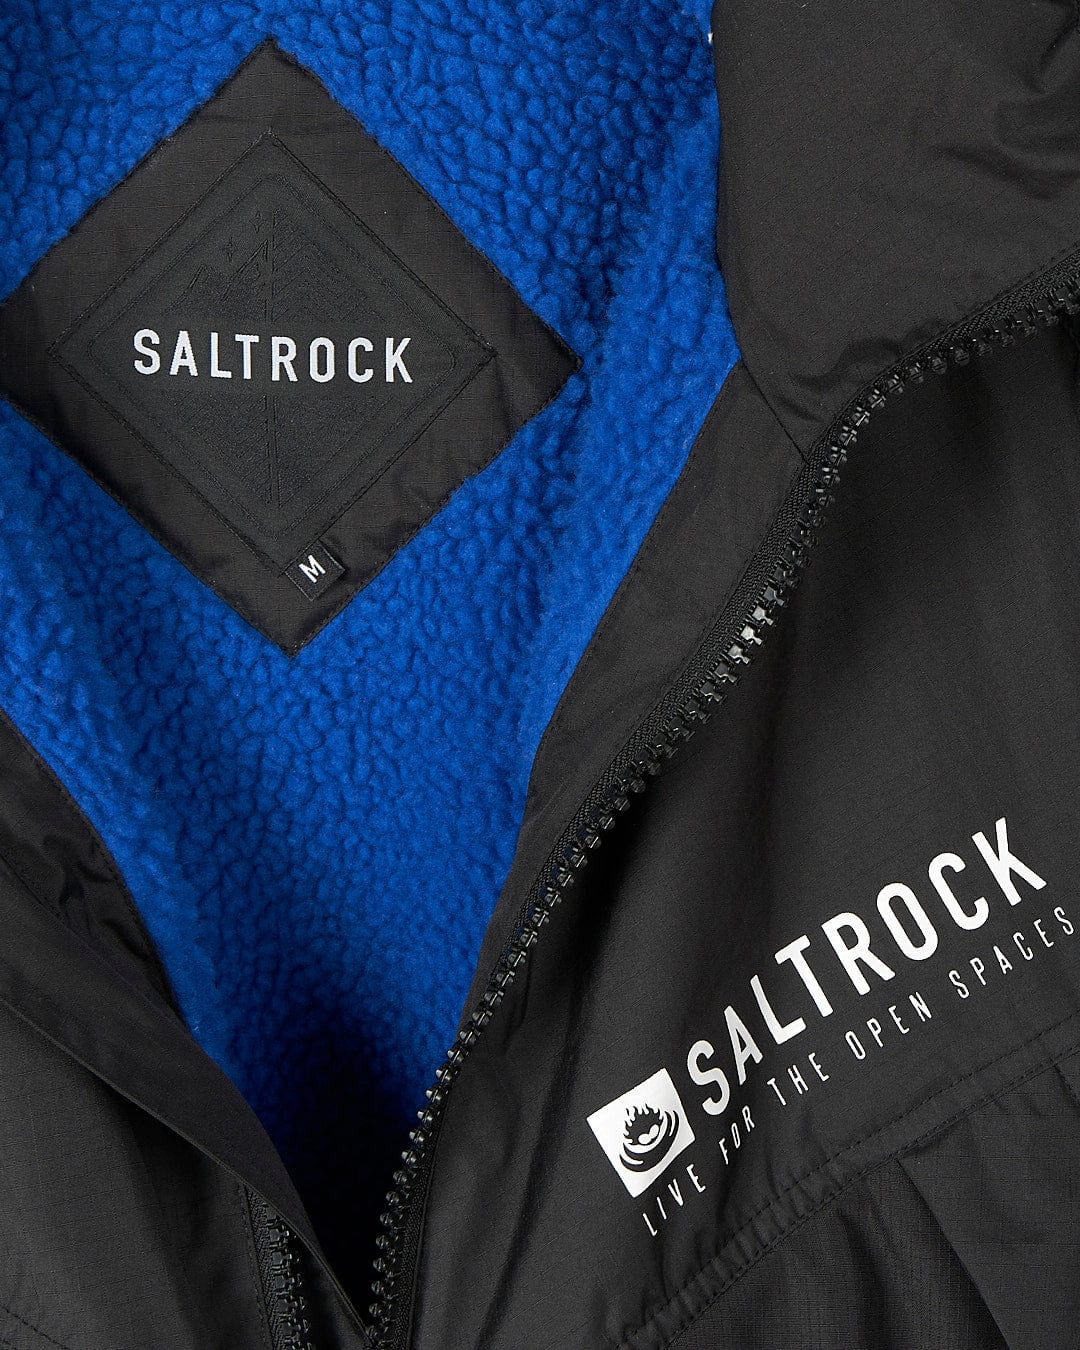 A high-performance Four Seasons - Waterproof Changing Robe - Black/Blue jacket with the brand name Saltrock on it.